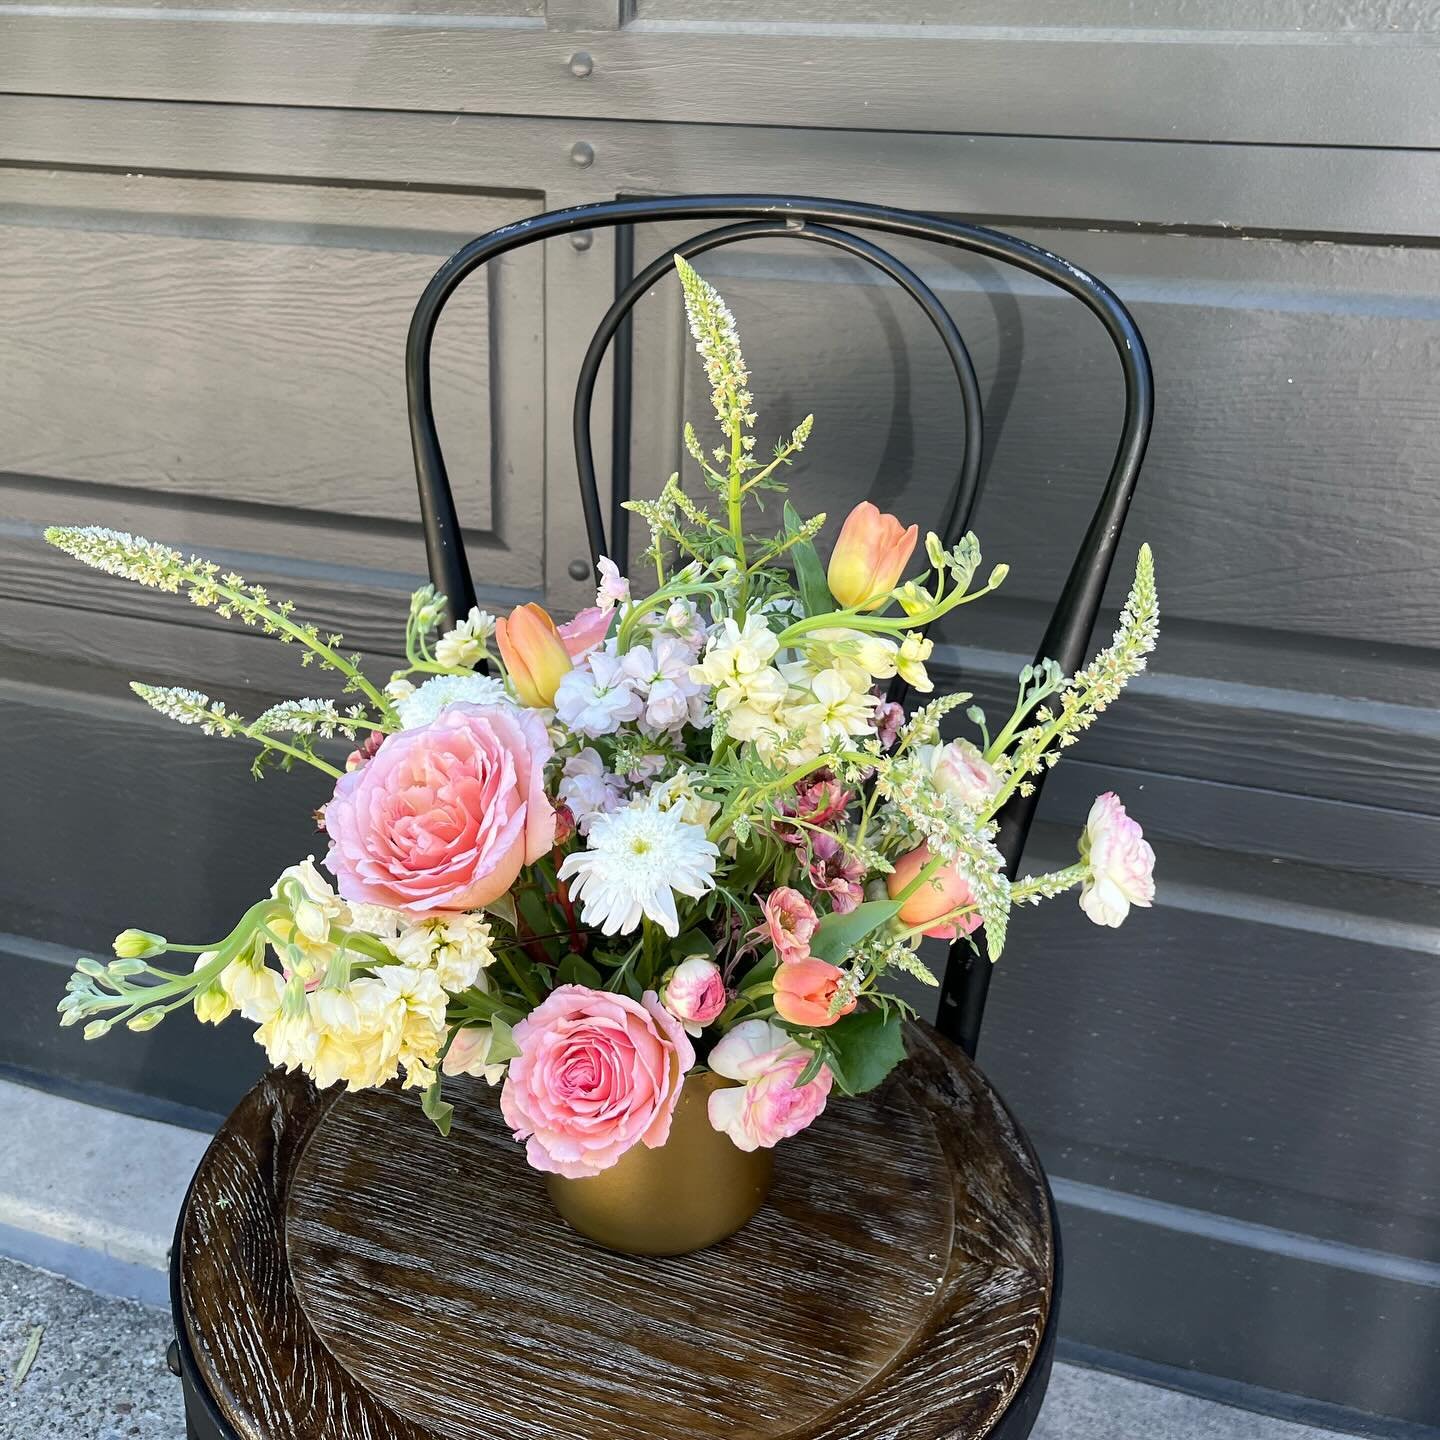 Many arrangements made, few pictures taken! Mother&rsquo;s Day was fun! So much gratitude to our new/returning customers who placed orders &amp; continue to support the work we do!! AND a huge thank you to our flower farmers &amp; vendors that make i